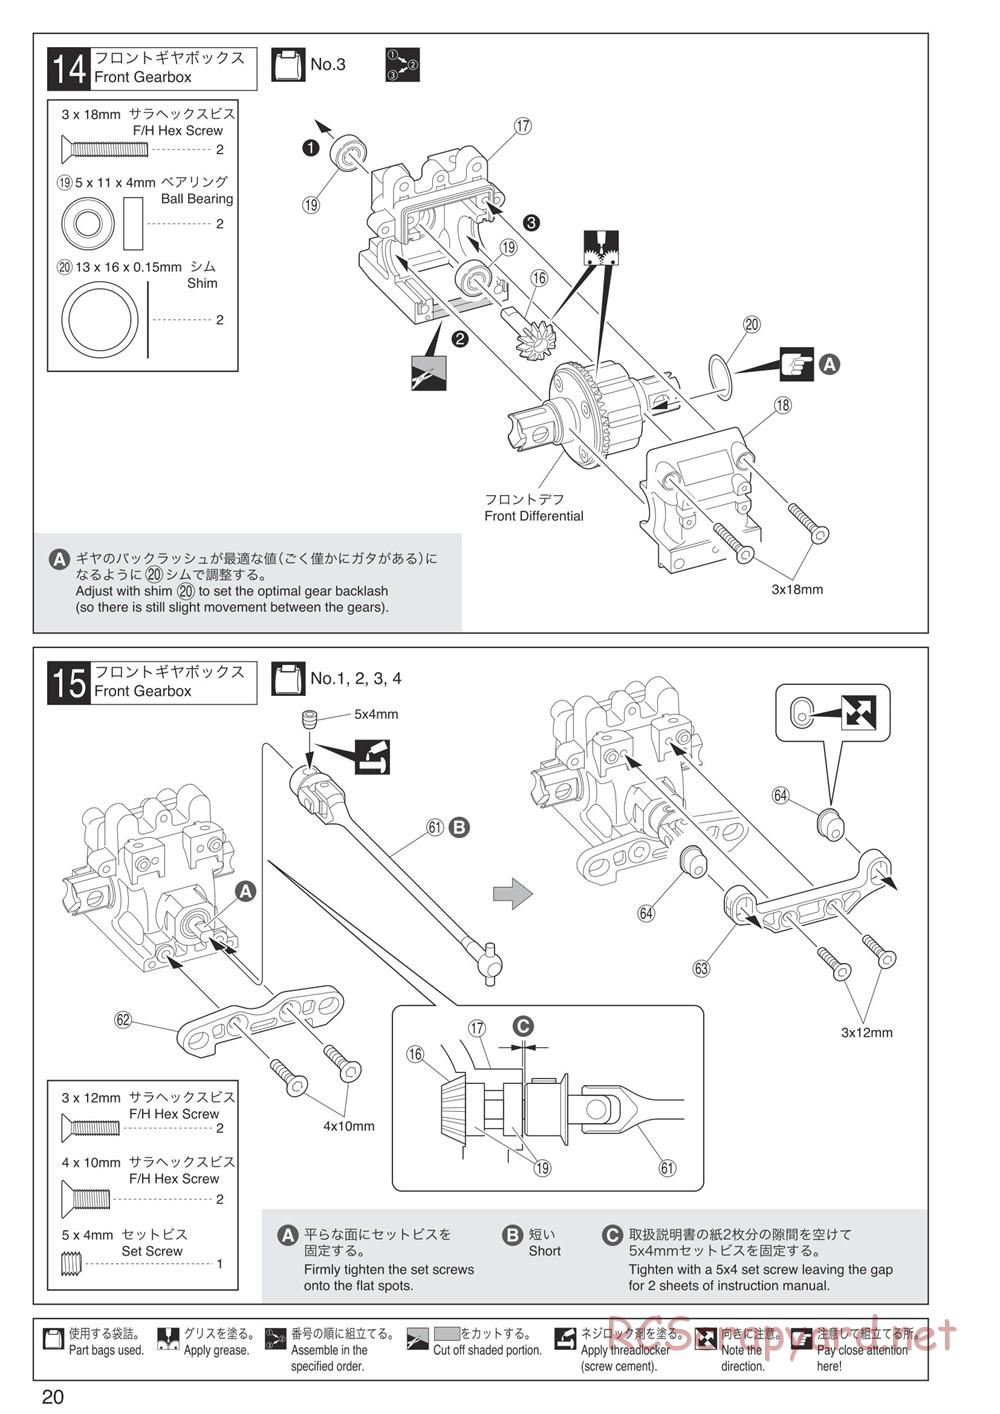 Kyosho - Inferno MP9 TKI4 10th Anniversary Special Edition - Manual - Page 20